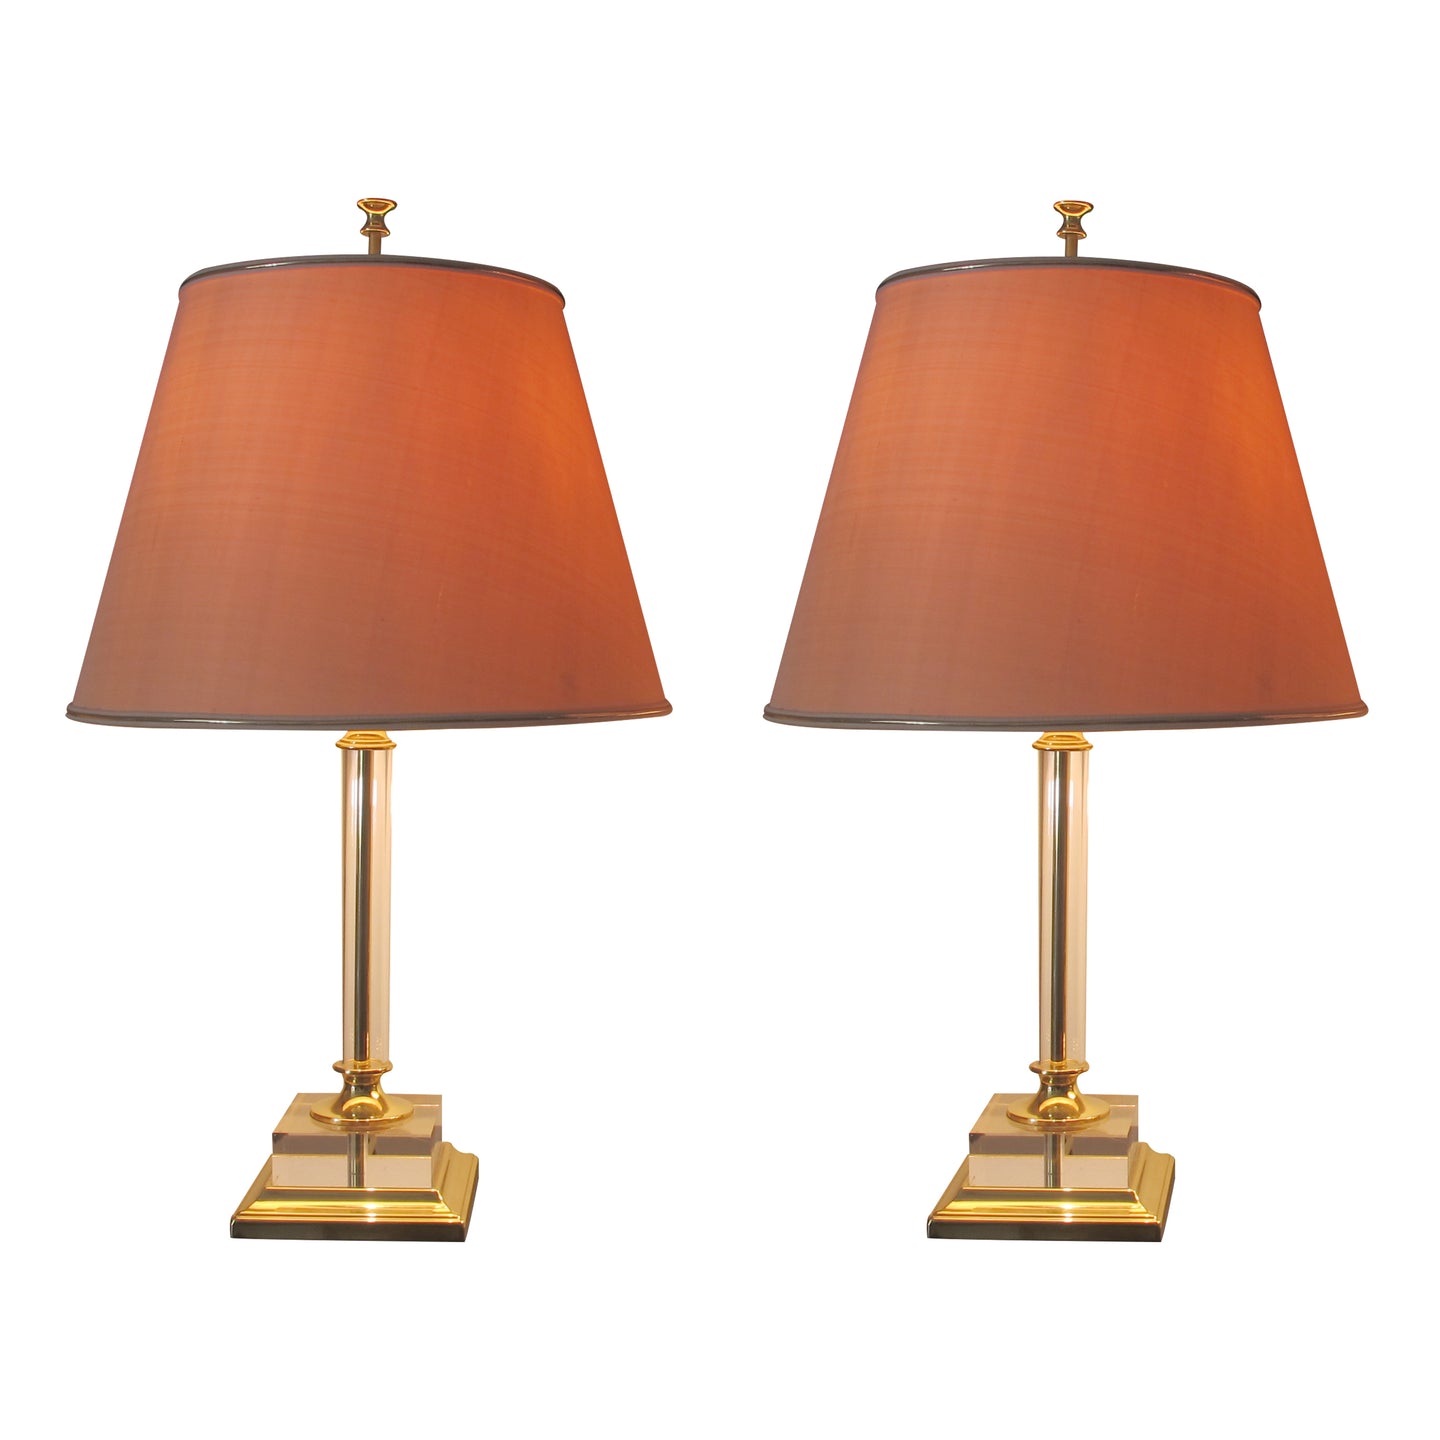 1970s Italian Pair of Large Lucite Table Lamps with Conic Lampshades